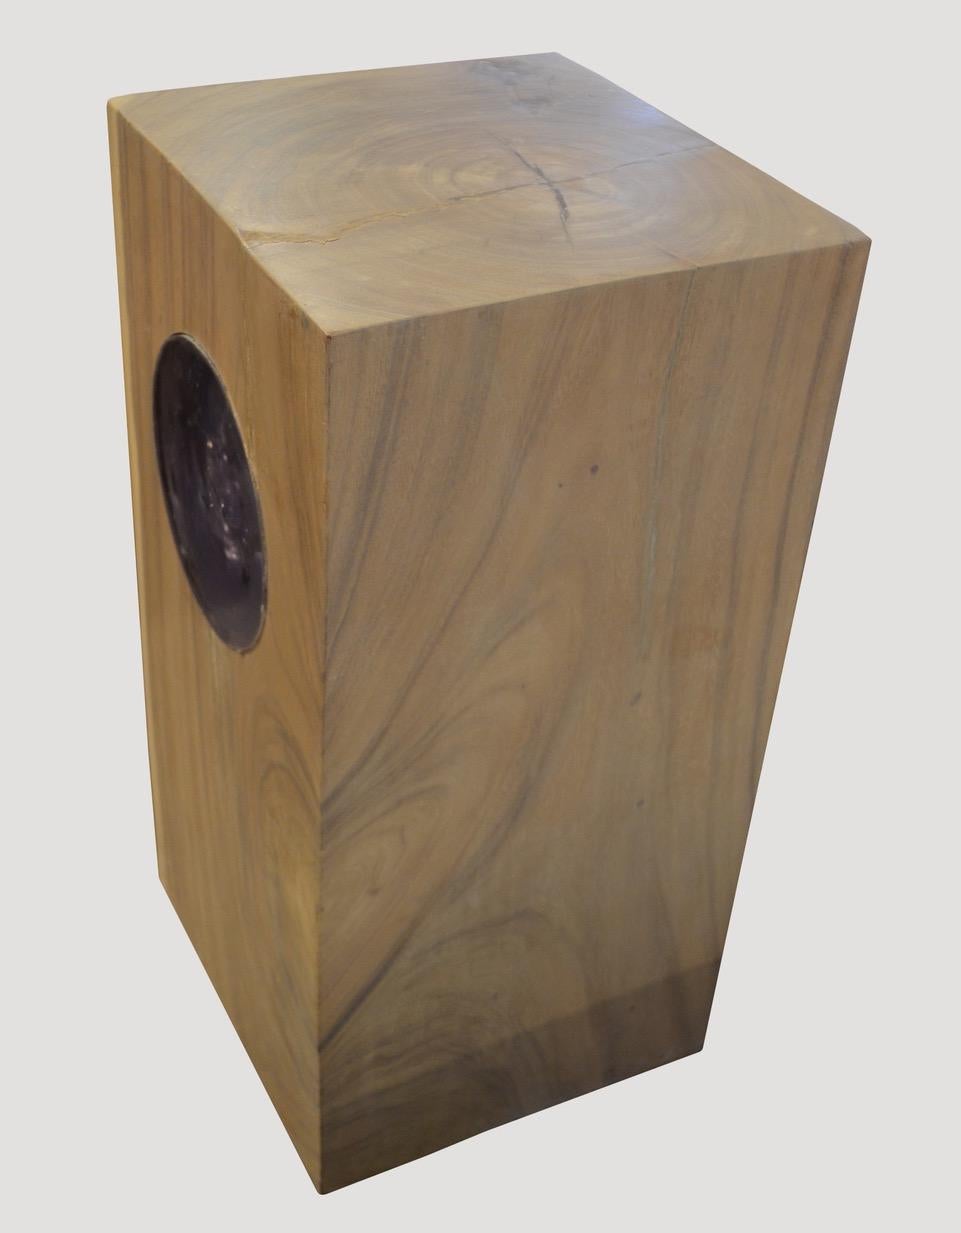 Andrianna Shamaris St. Barts Suar Wood Pedestal with Resin In Excellent Condition For Sale In New York, NY